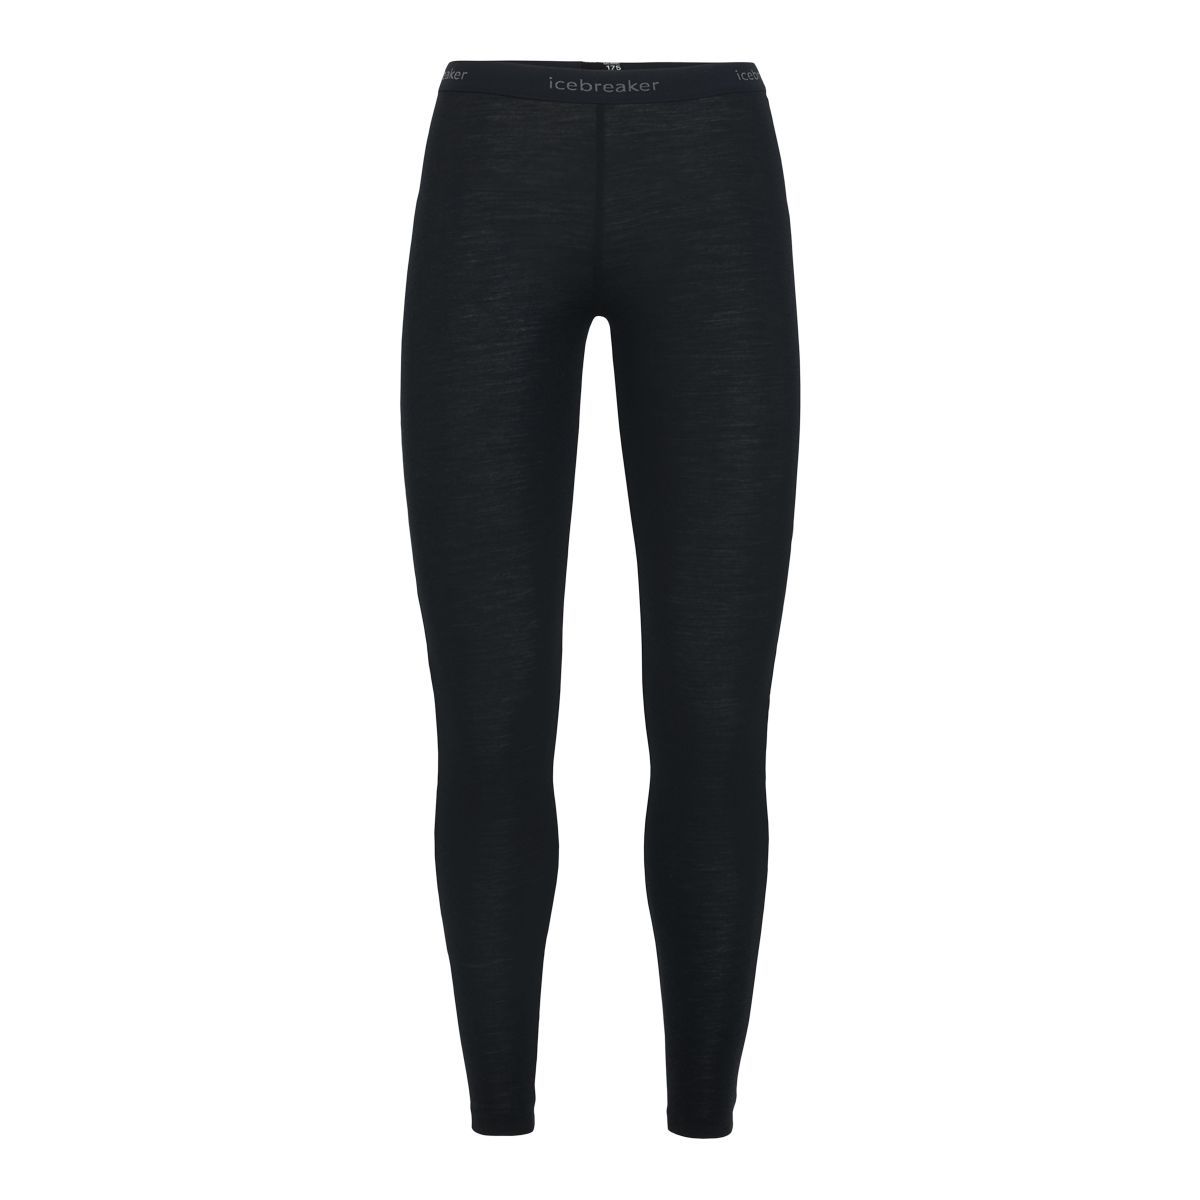 FWD Women's Friday Everyday Leggings, Pants, High Rise, Stretch